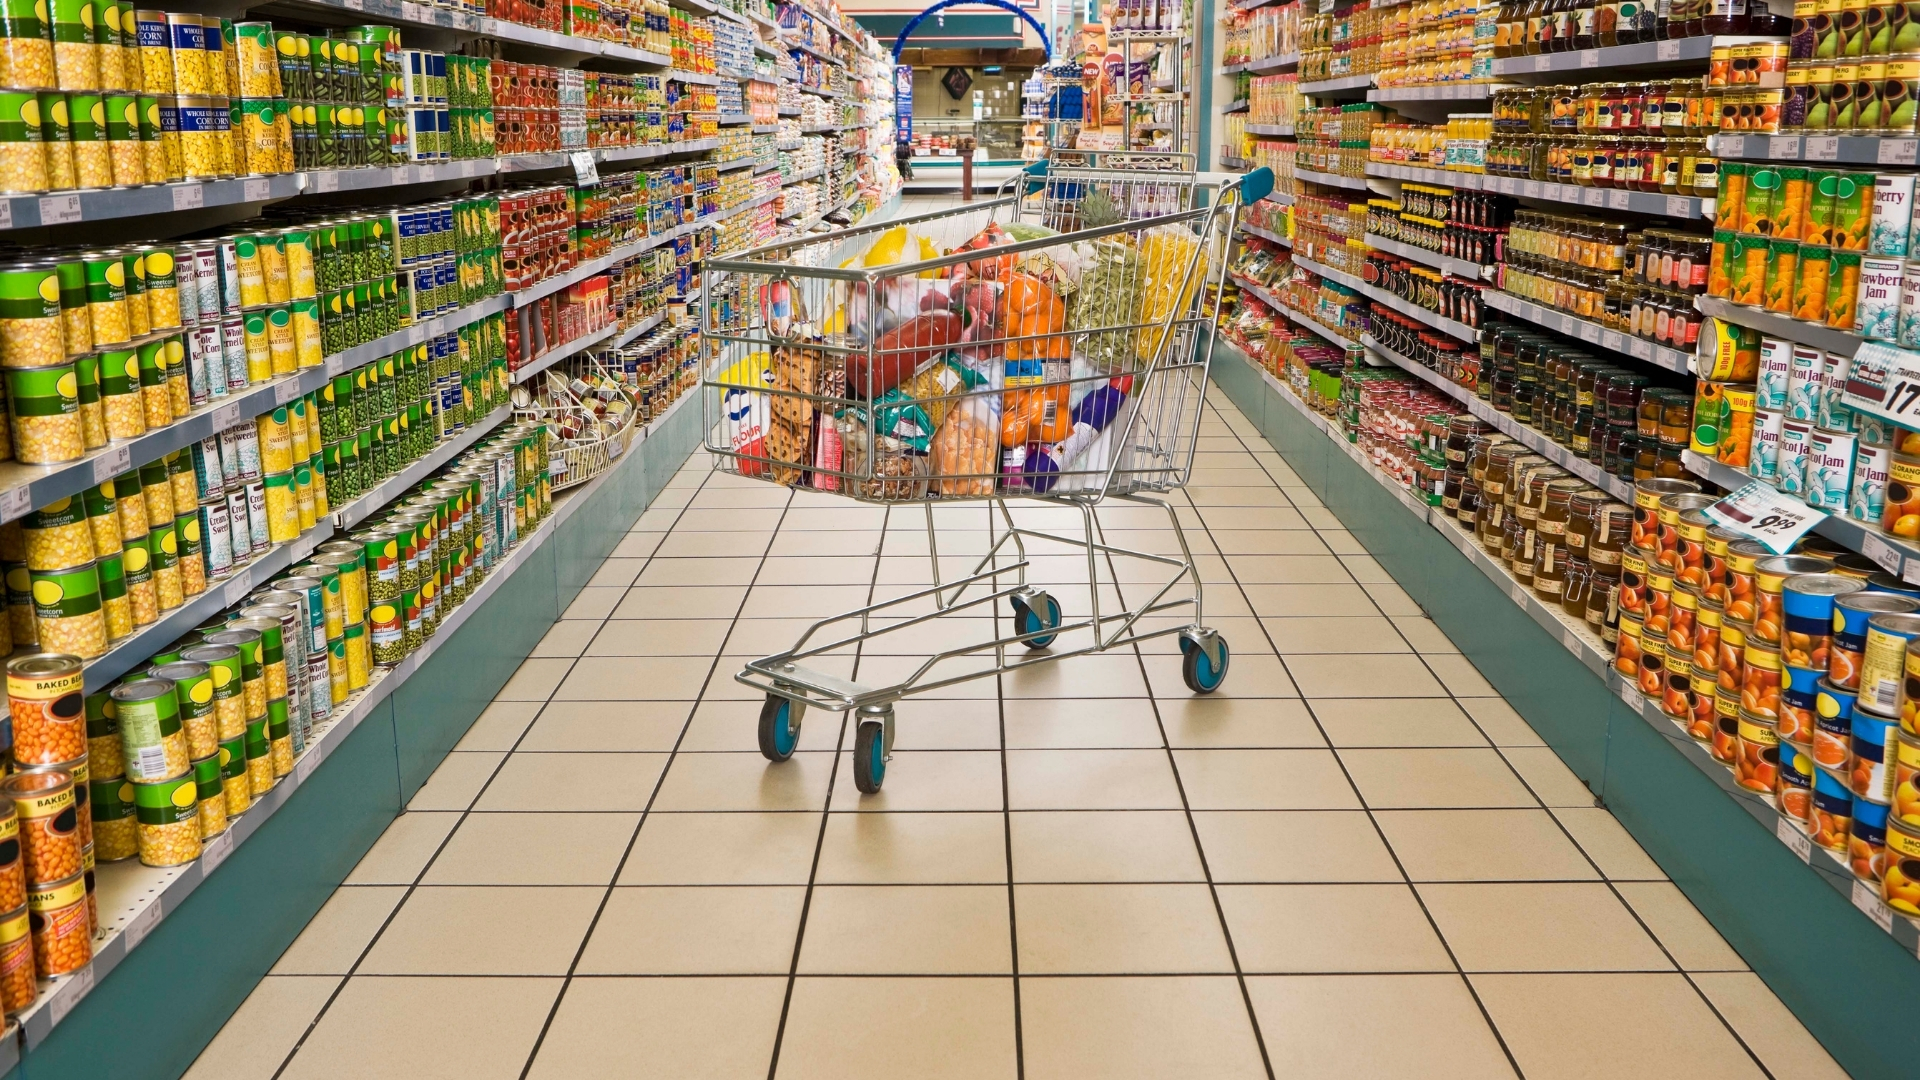 Shopping Cart Abandonment and how retailers can battle it